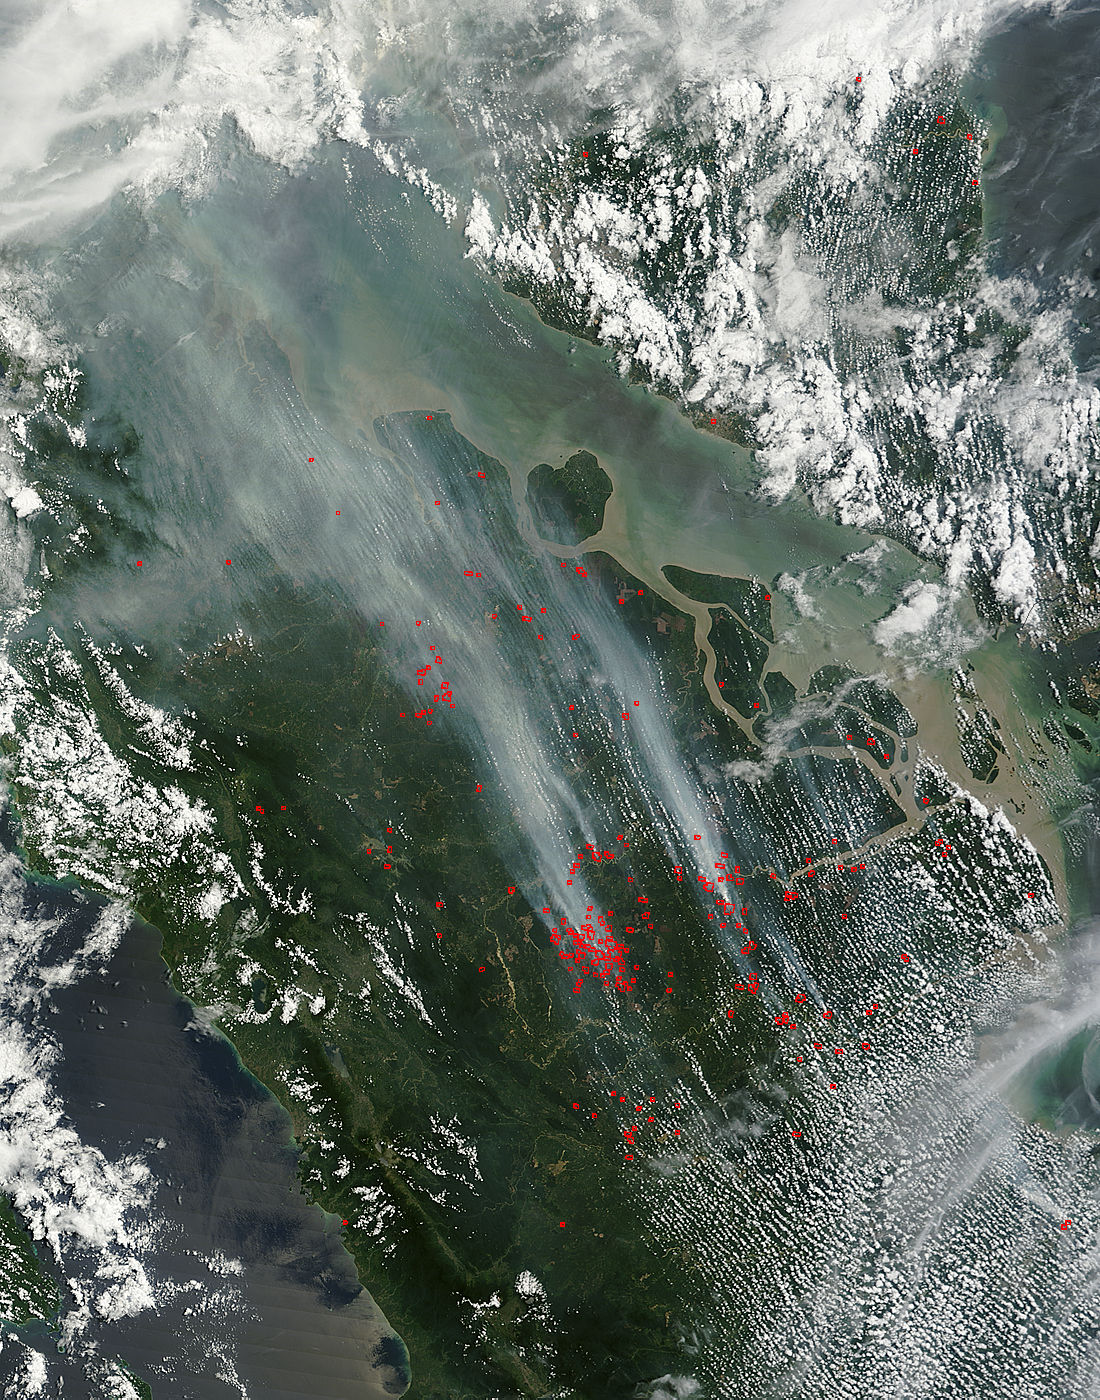 Fires and smoke in Sumatra, Indonesia - related image preview